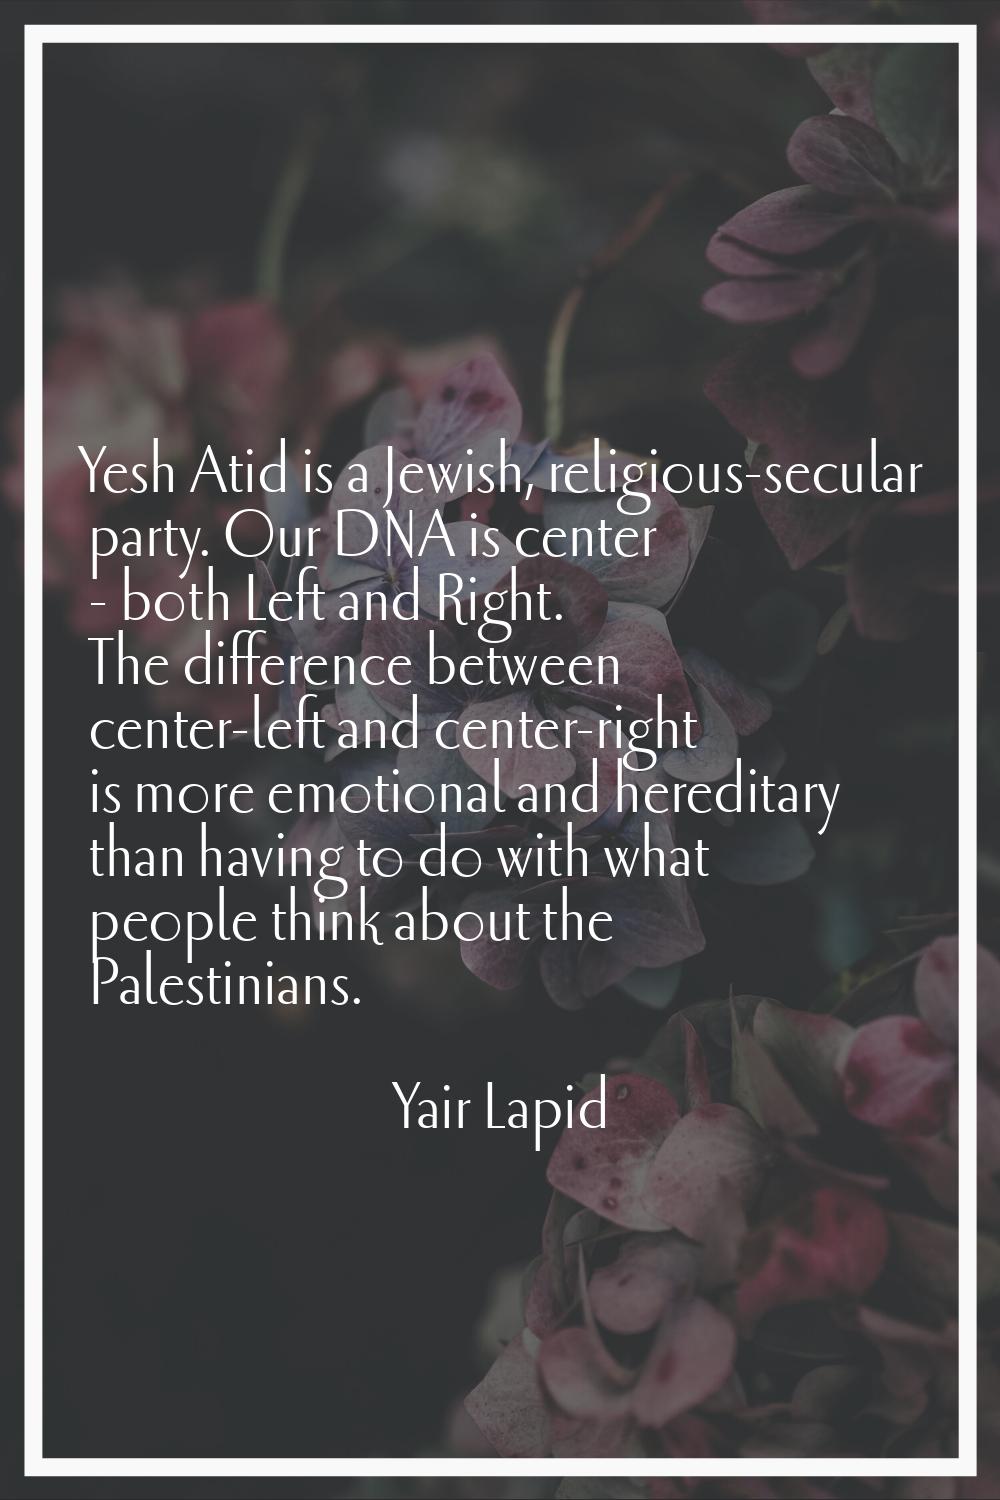 Yesh Atid is a Jewish, religious-secular party. Our DNA is center - both Left and Right. The differ